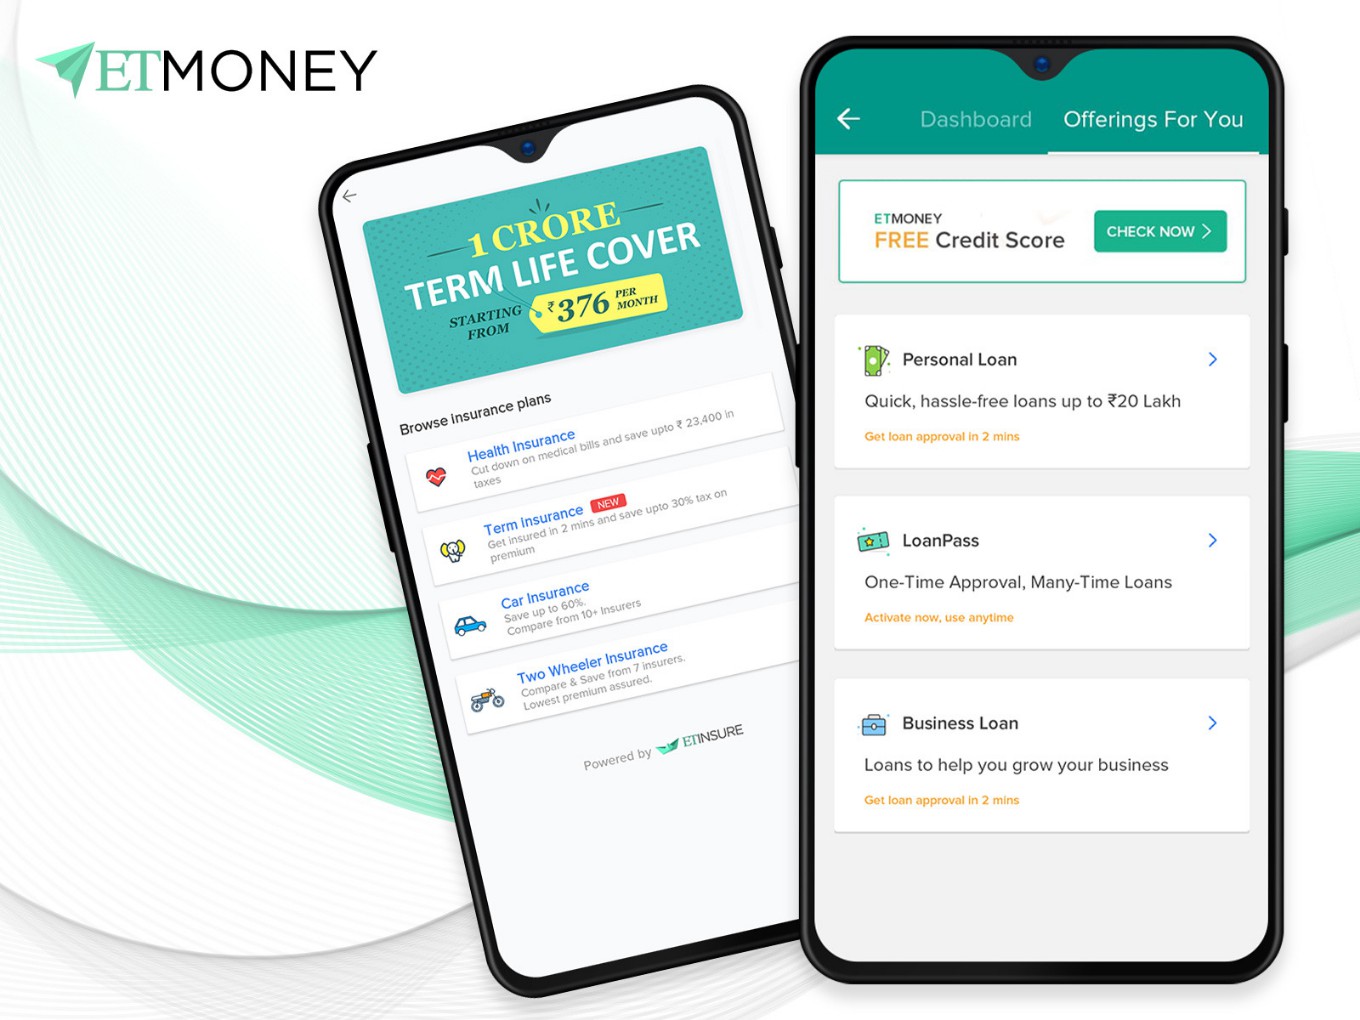 ETMONEY Hunts For Revenue With Insurance And Loan Services